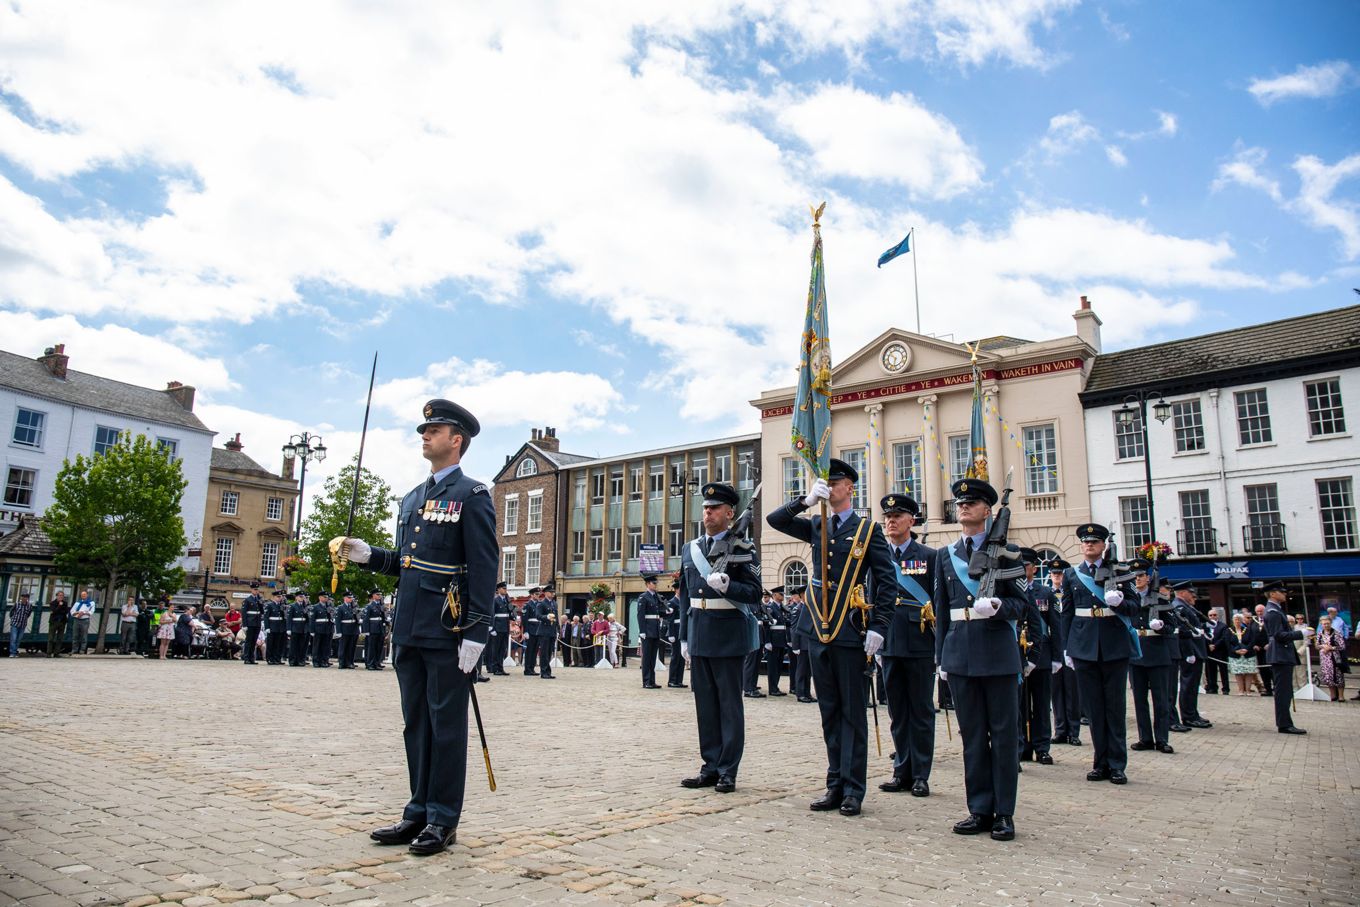 RAF personnel in service dress on parade